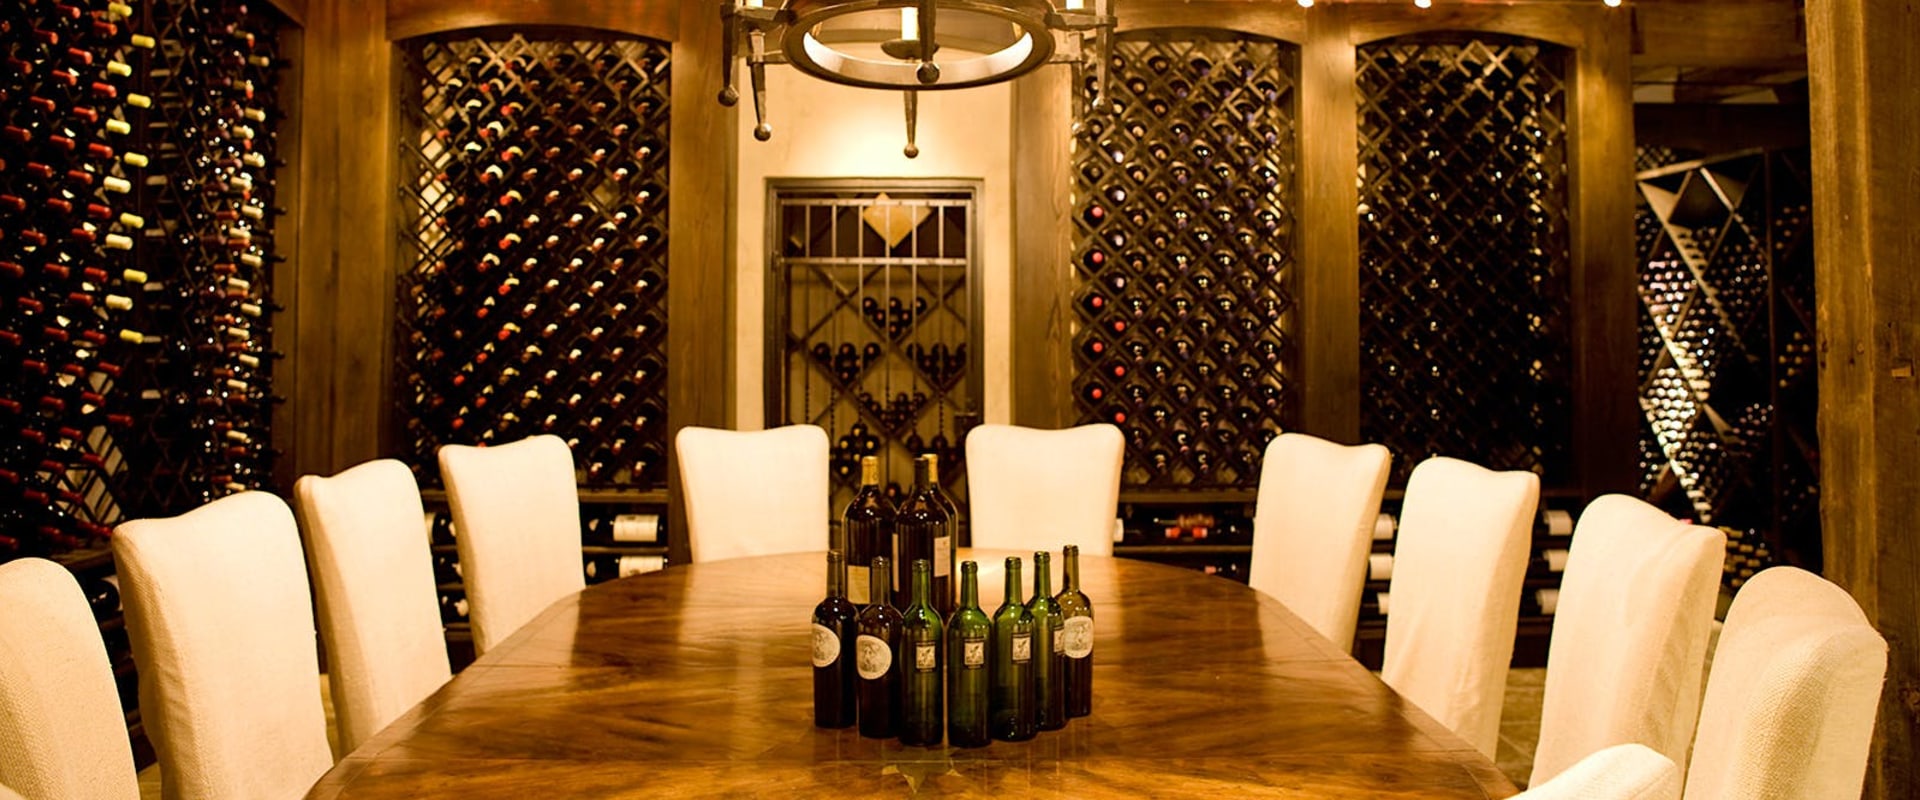 Experience Fine Dining and Award-Winning Wines at LakeHouse Restaurant in Suffolk County NY